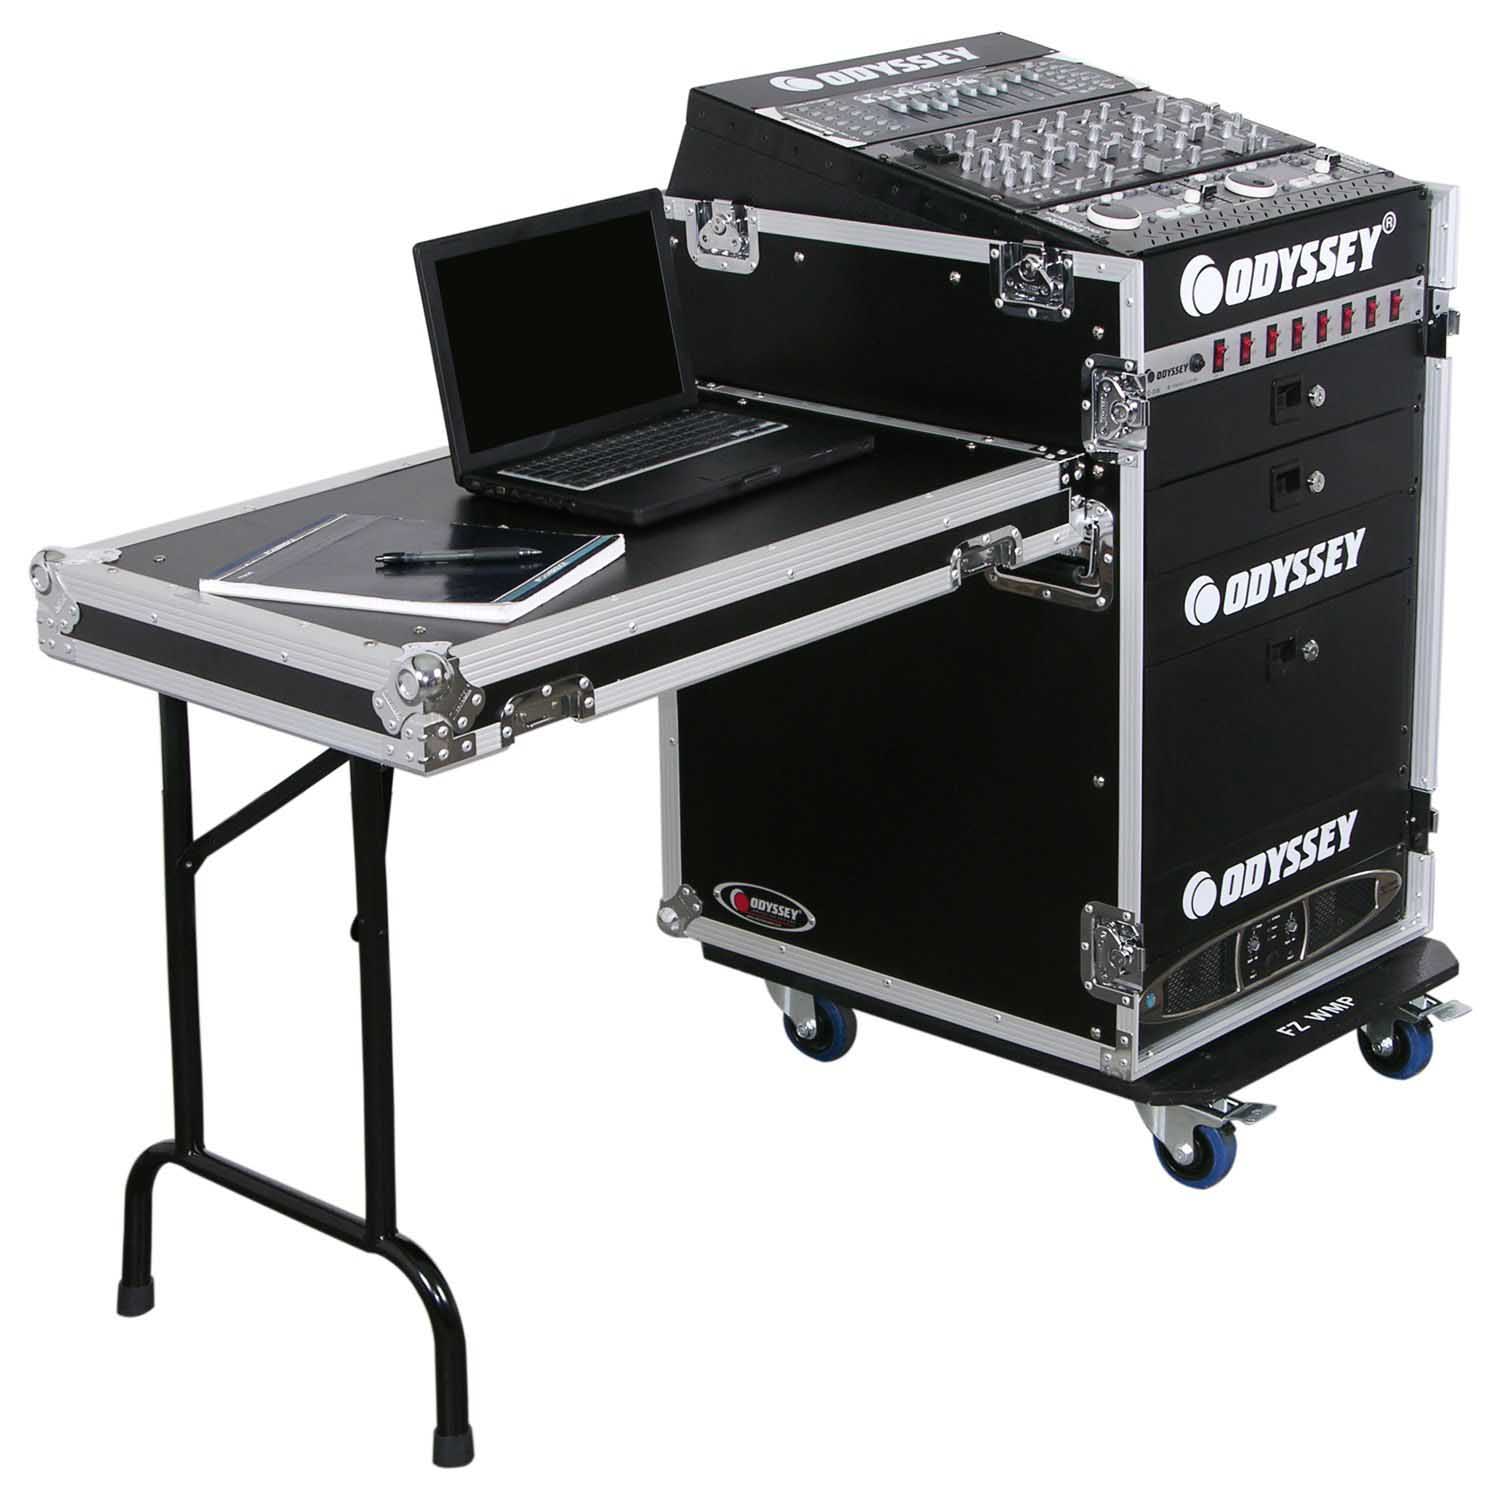 Odyssey FZ1316WDLX-CUSTOM - EXTRA TALL LID TO FIT MIDAS M32R - Deluxe 13U Top Slanted 16U Bottom Vertical Pro Combo Rack with Side Table and Casters - Hollywood DJ